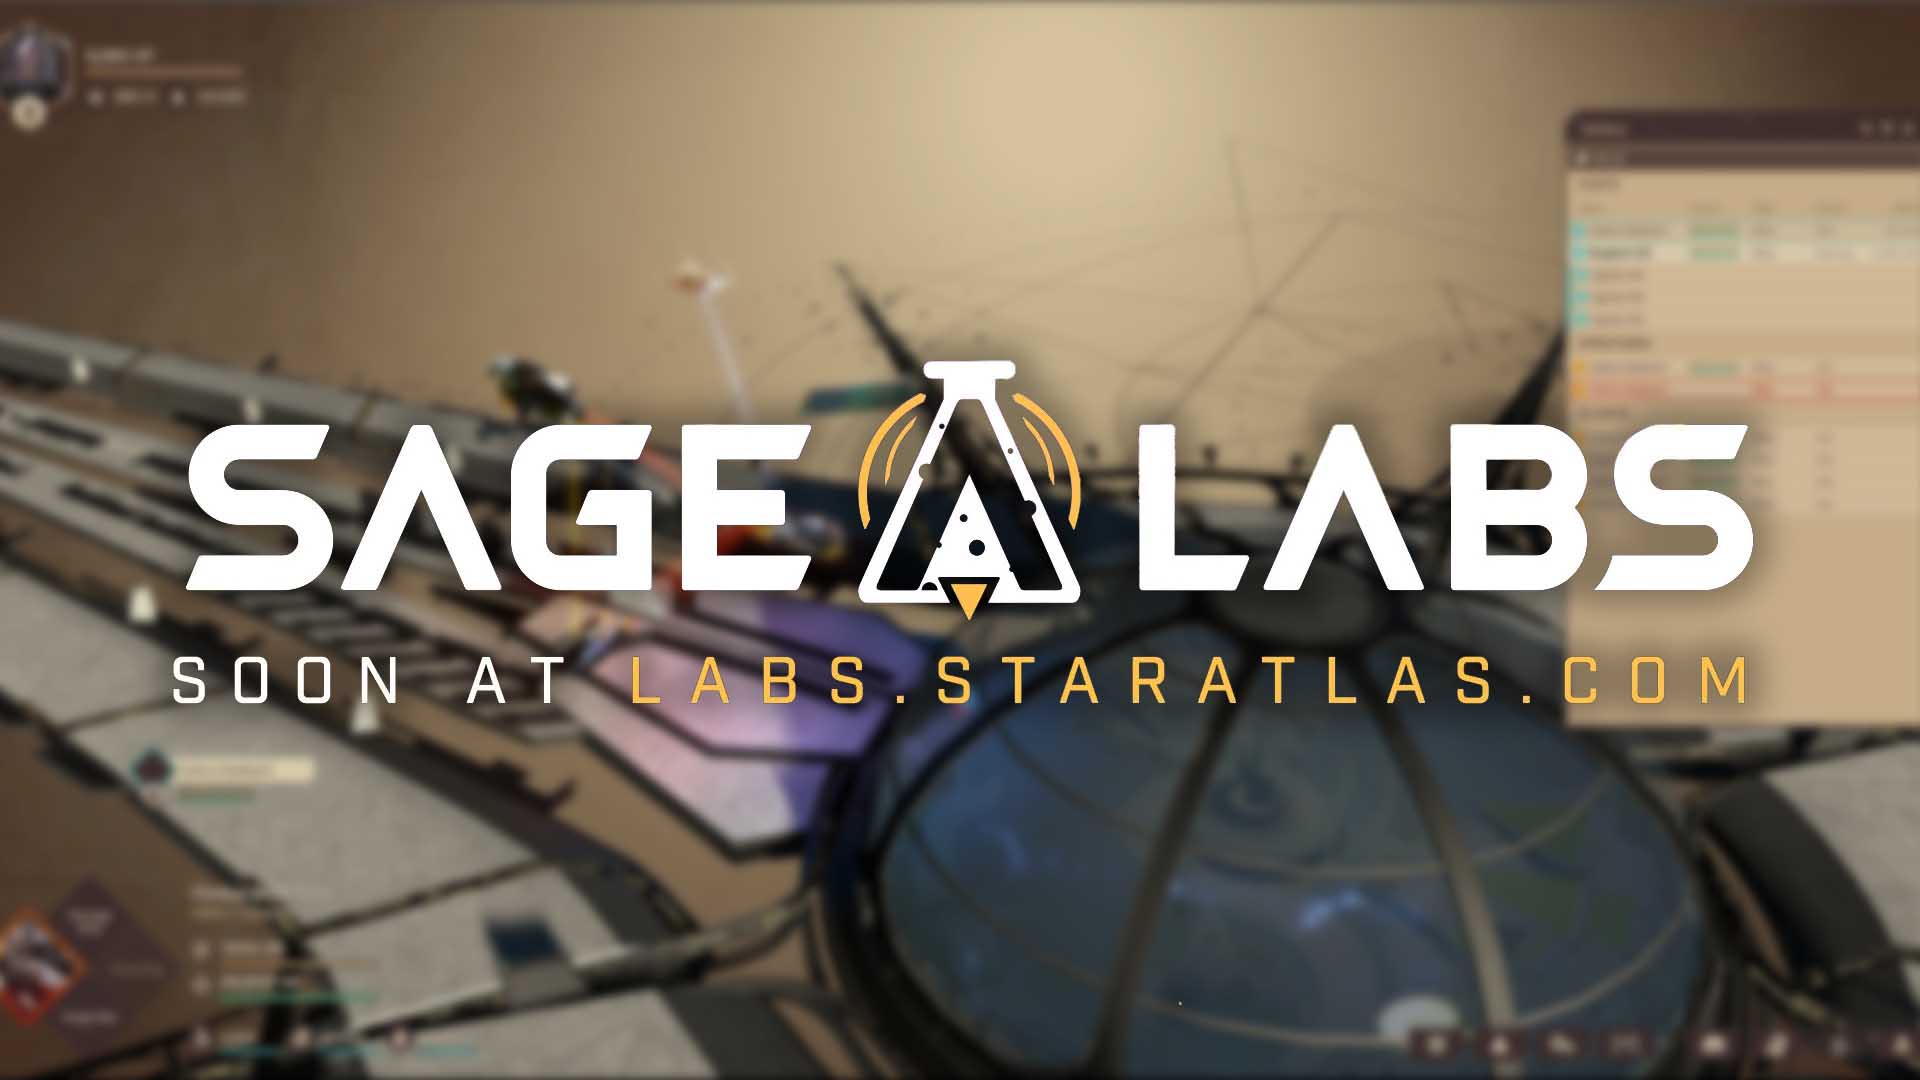 Star Atlas Announces First Ever Web3 Space Economy Simulation Game for  Solana and P2E Gamers, by Star Atlas, Star Atlas